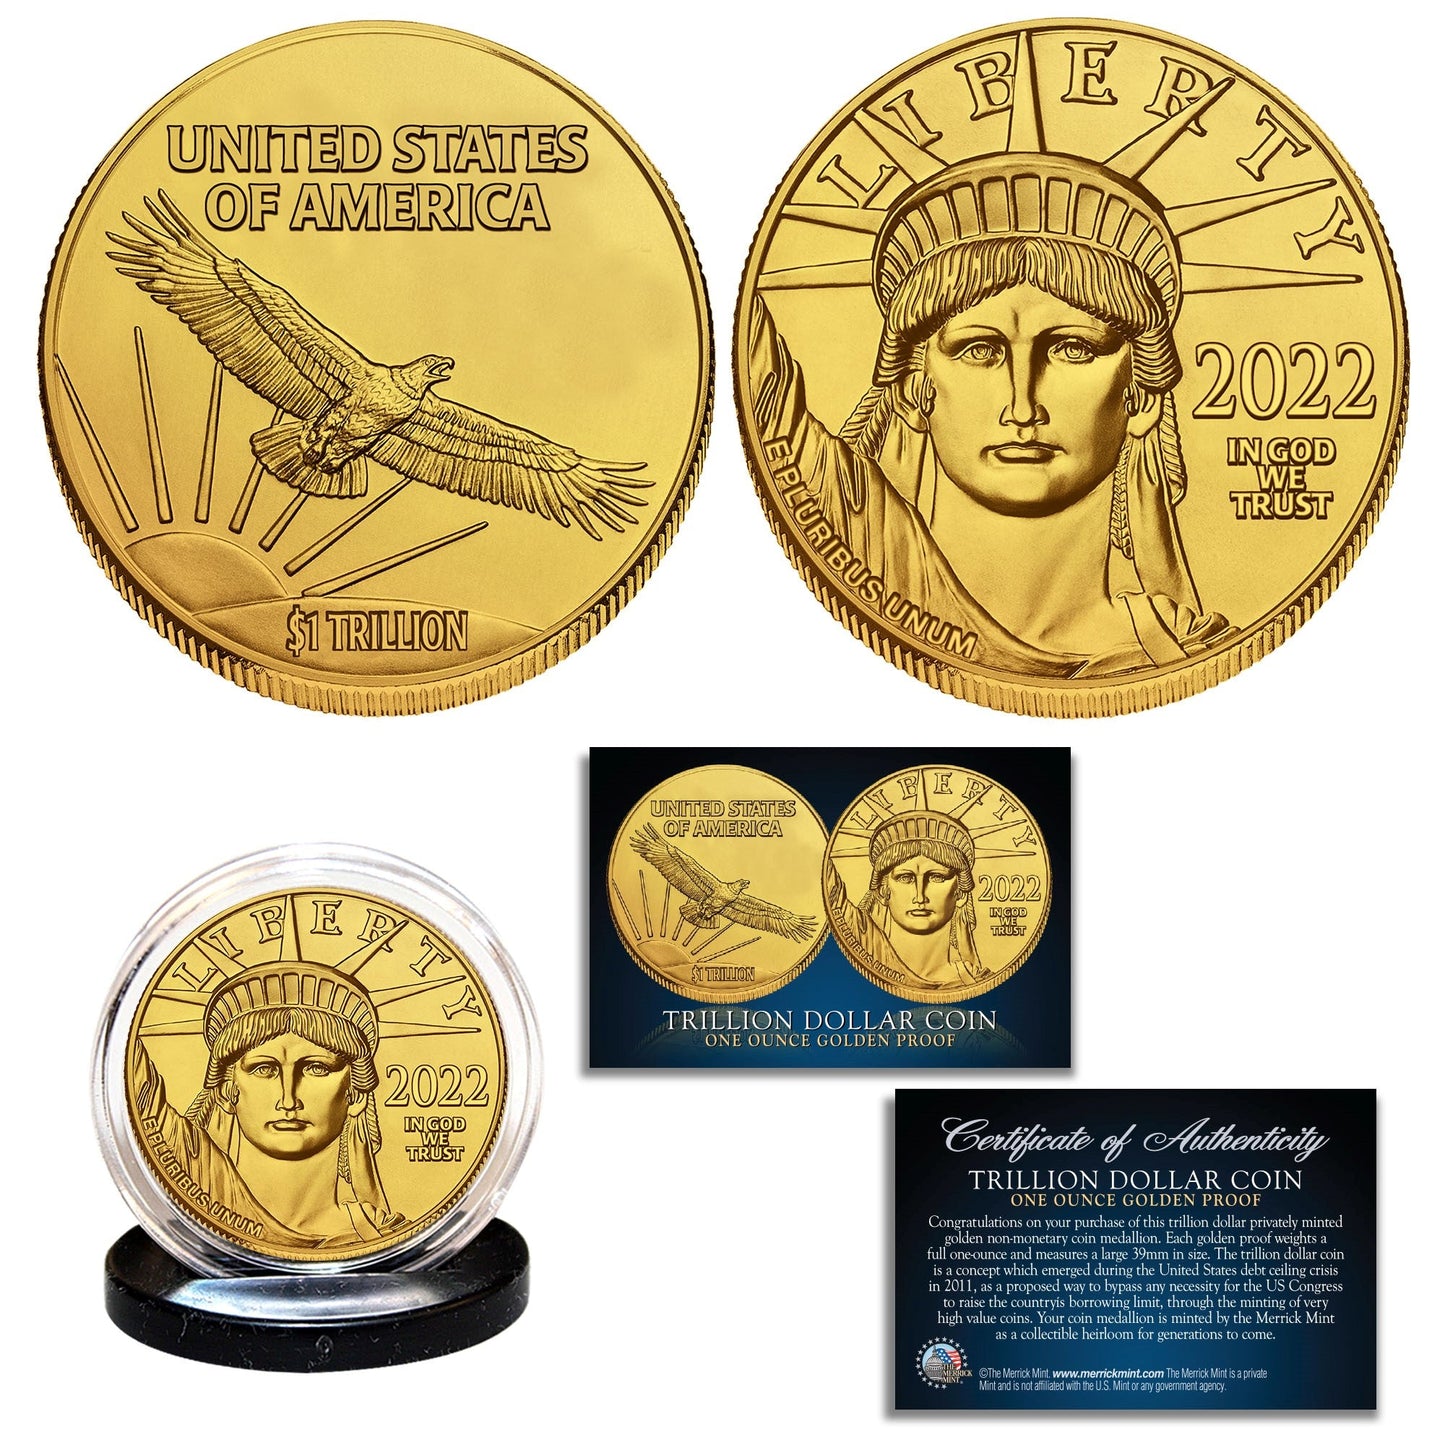 One Trillion Dollar Coin Proof Golden tribute 39mm Coin 1-Ounce - Proud Patriots